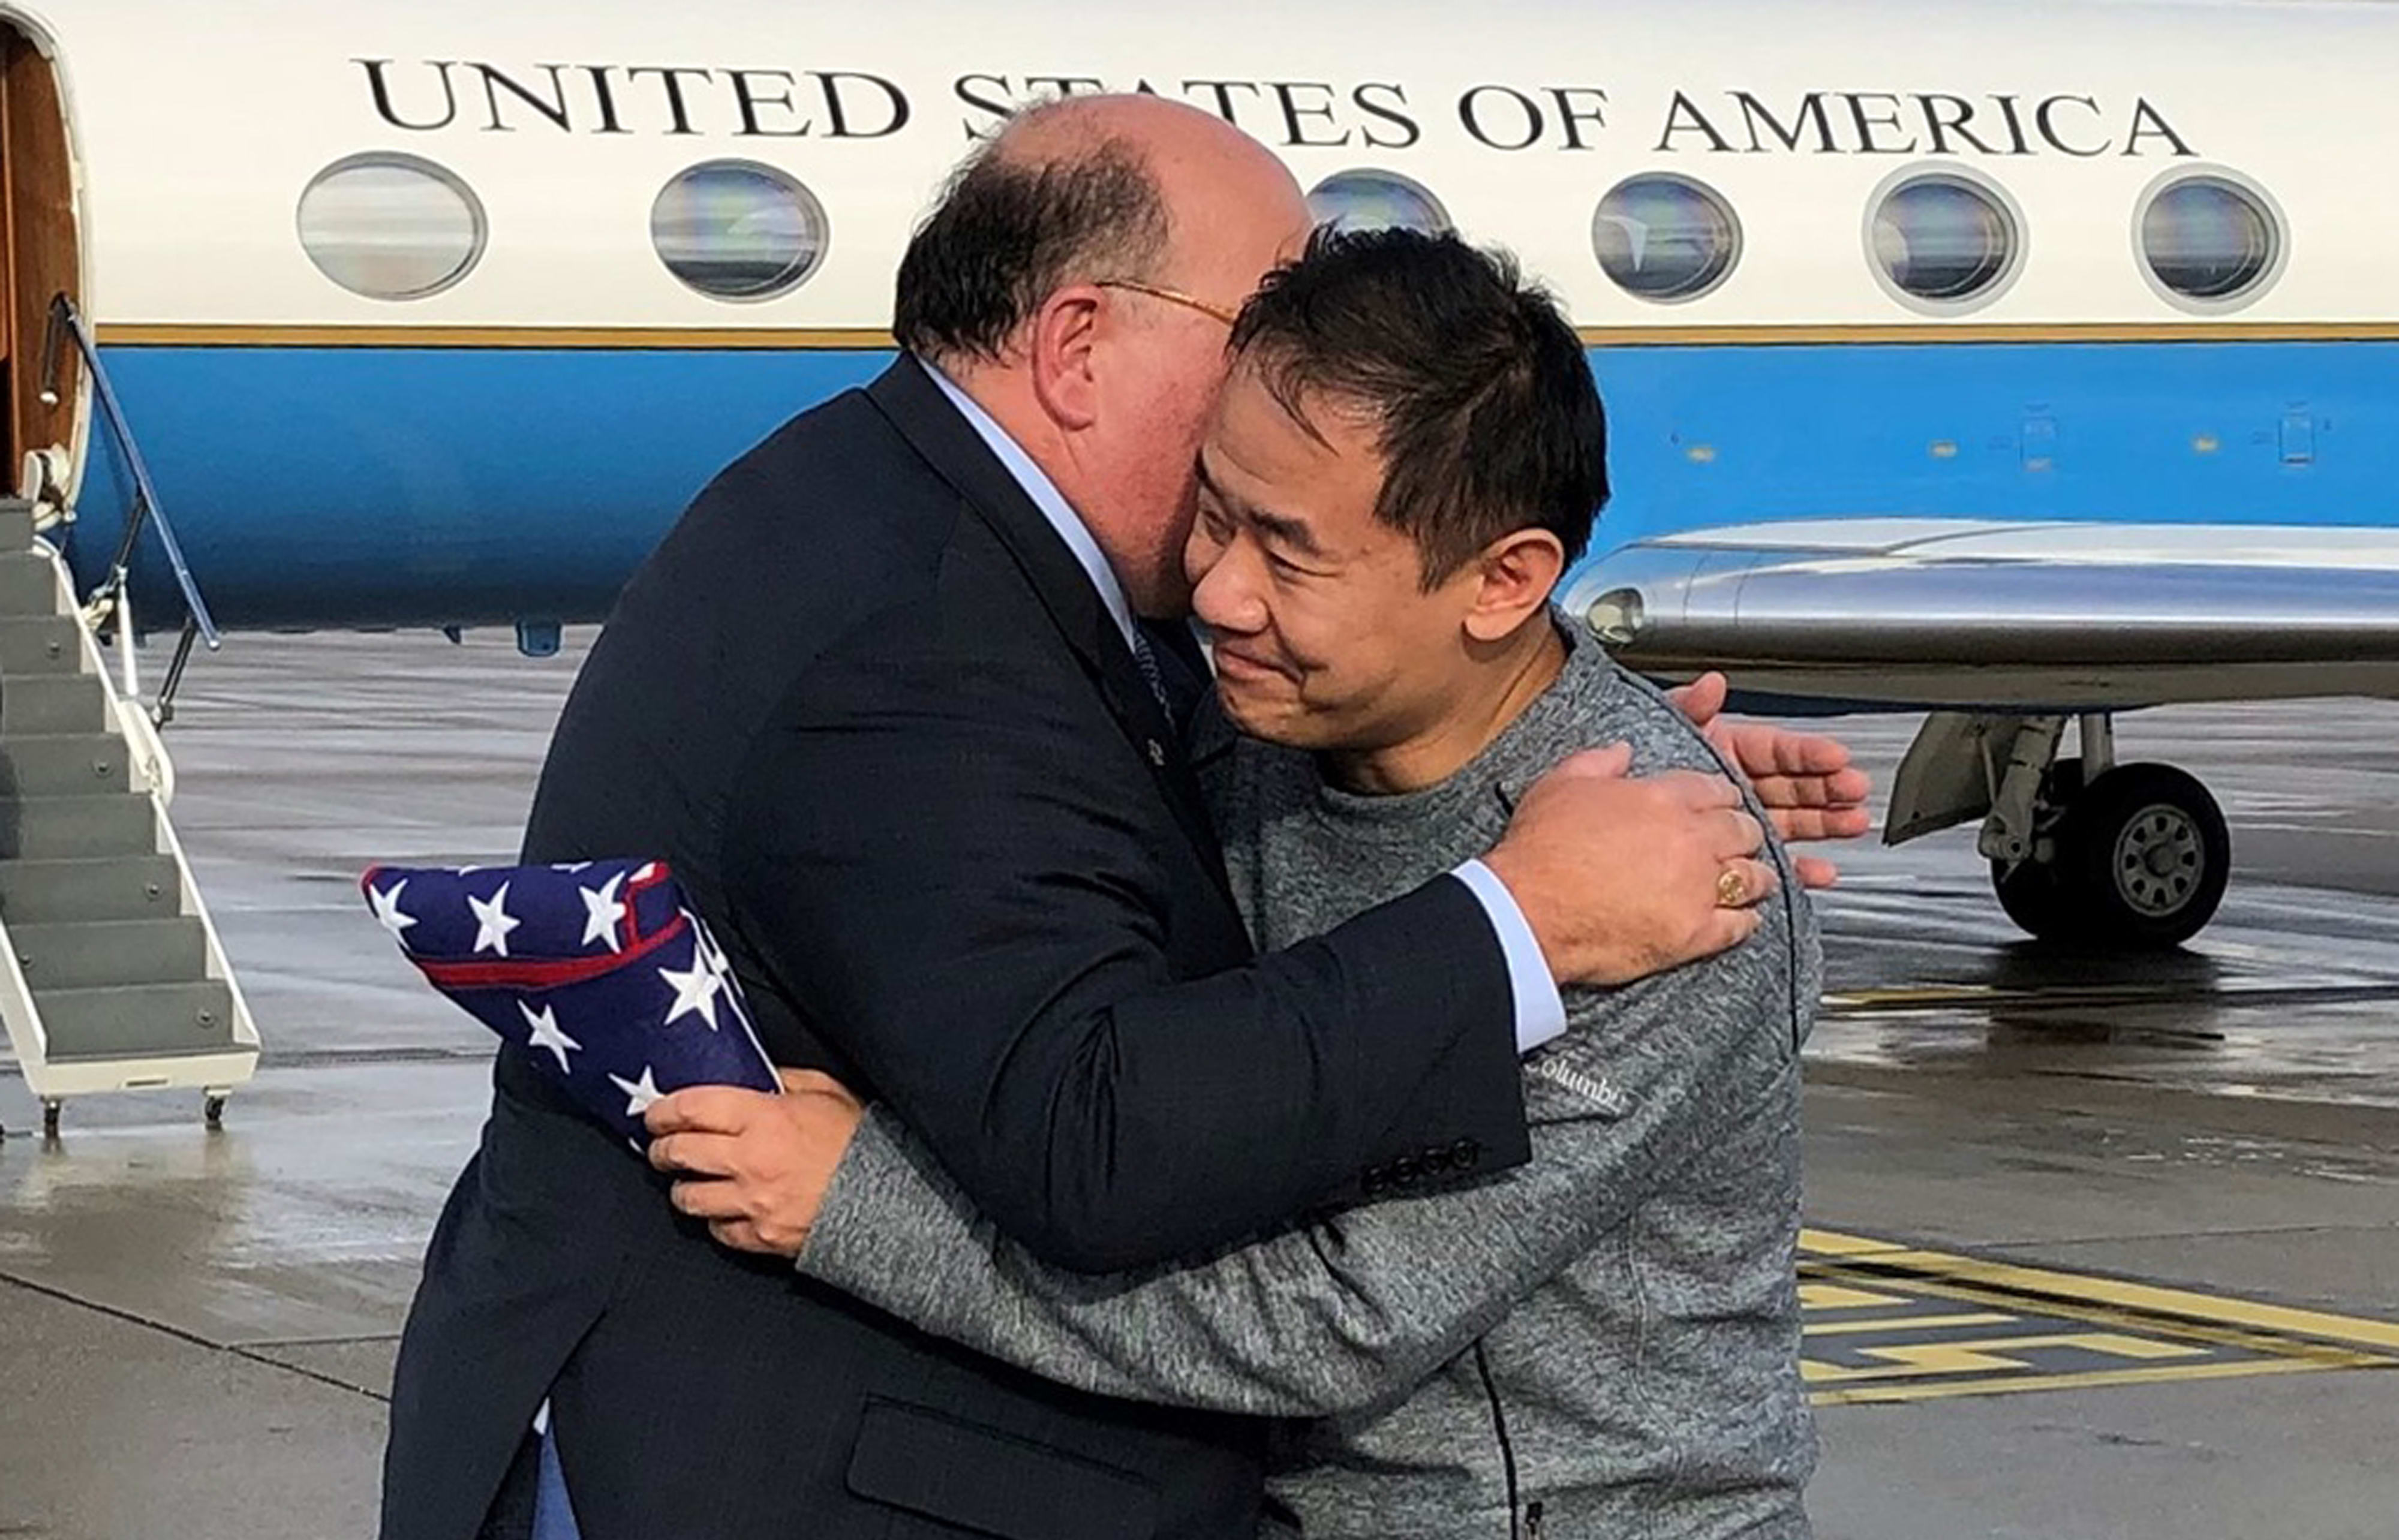 US Ambassador to Switzerland Edward T. McMullen, Jr. presents a US flag to and welcomes Xiyue Wang on arrival in Switzerland after his release from Iran on December 7, 2019.